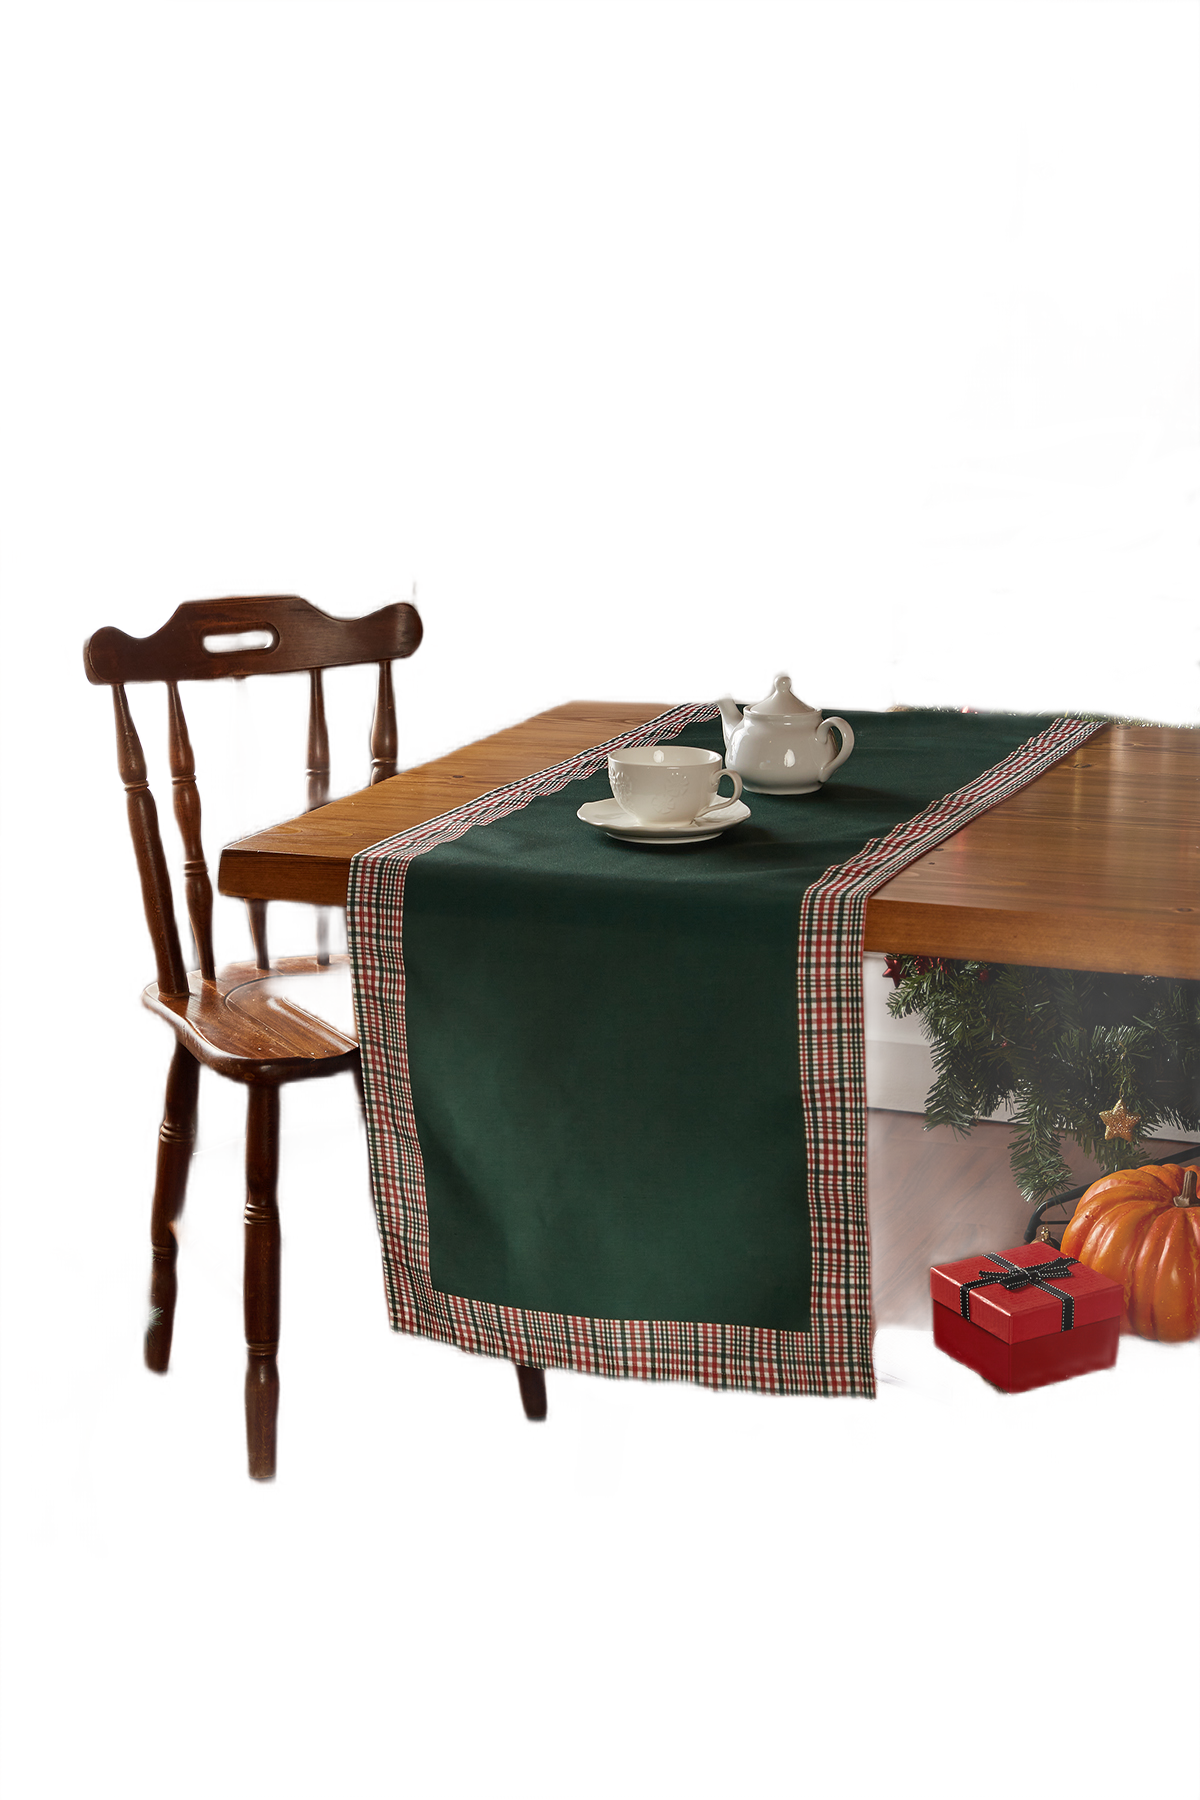 Hunter Green and Red Runner with Plaid Border, Holiday Decor - Wear Sierra